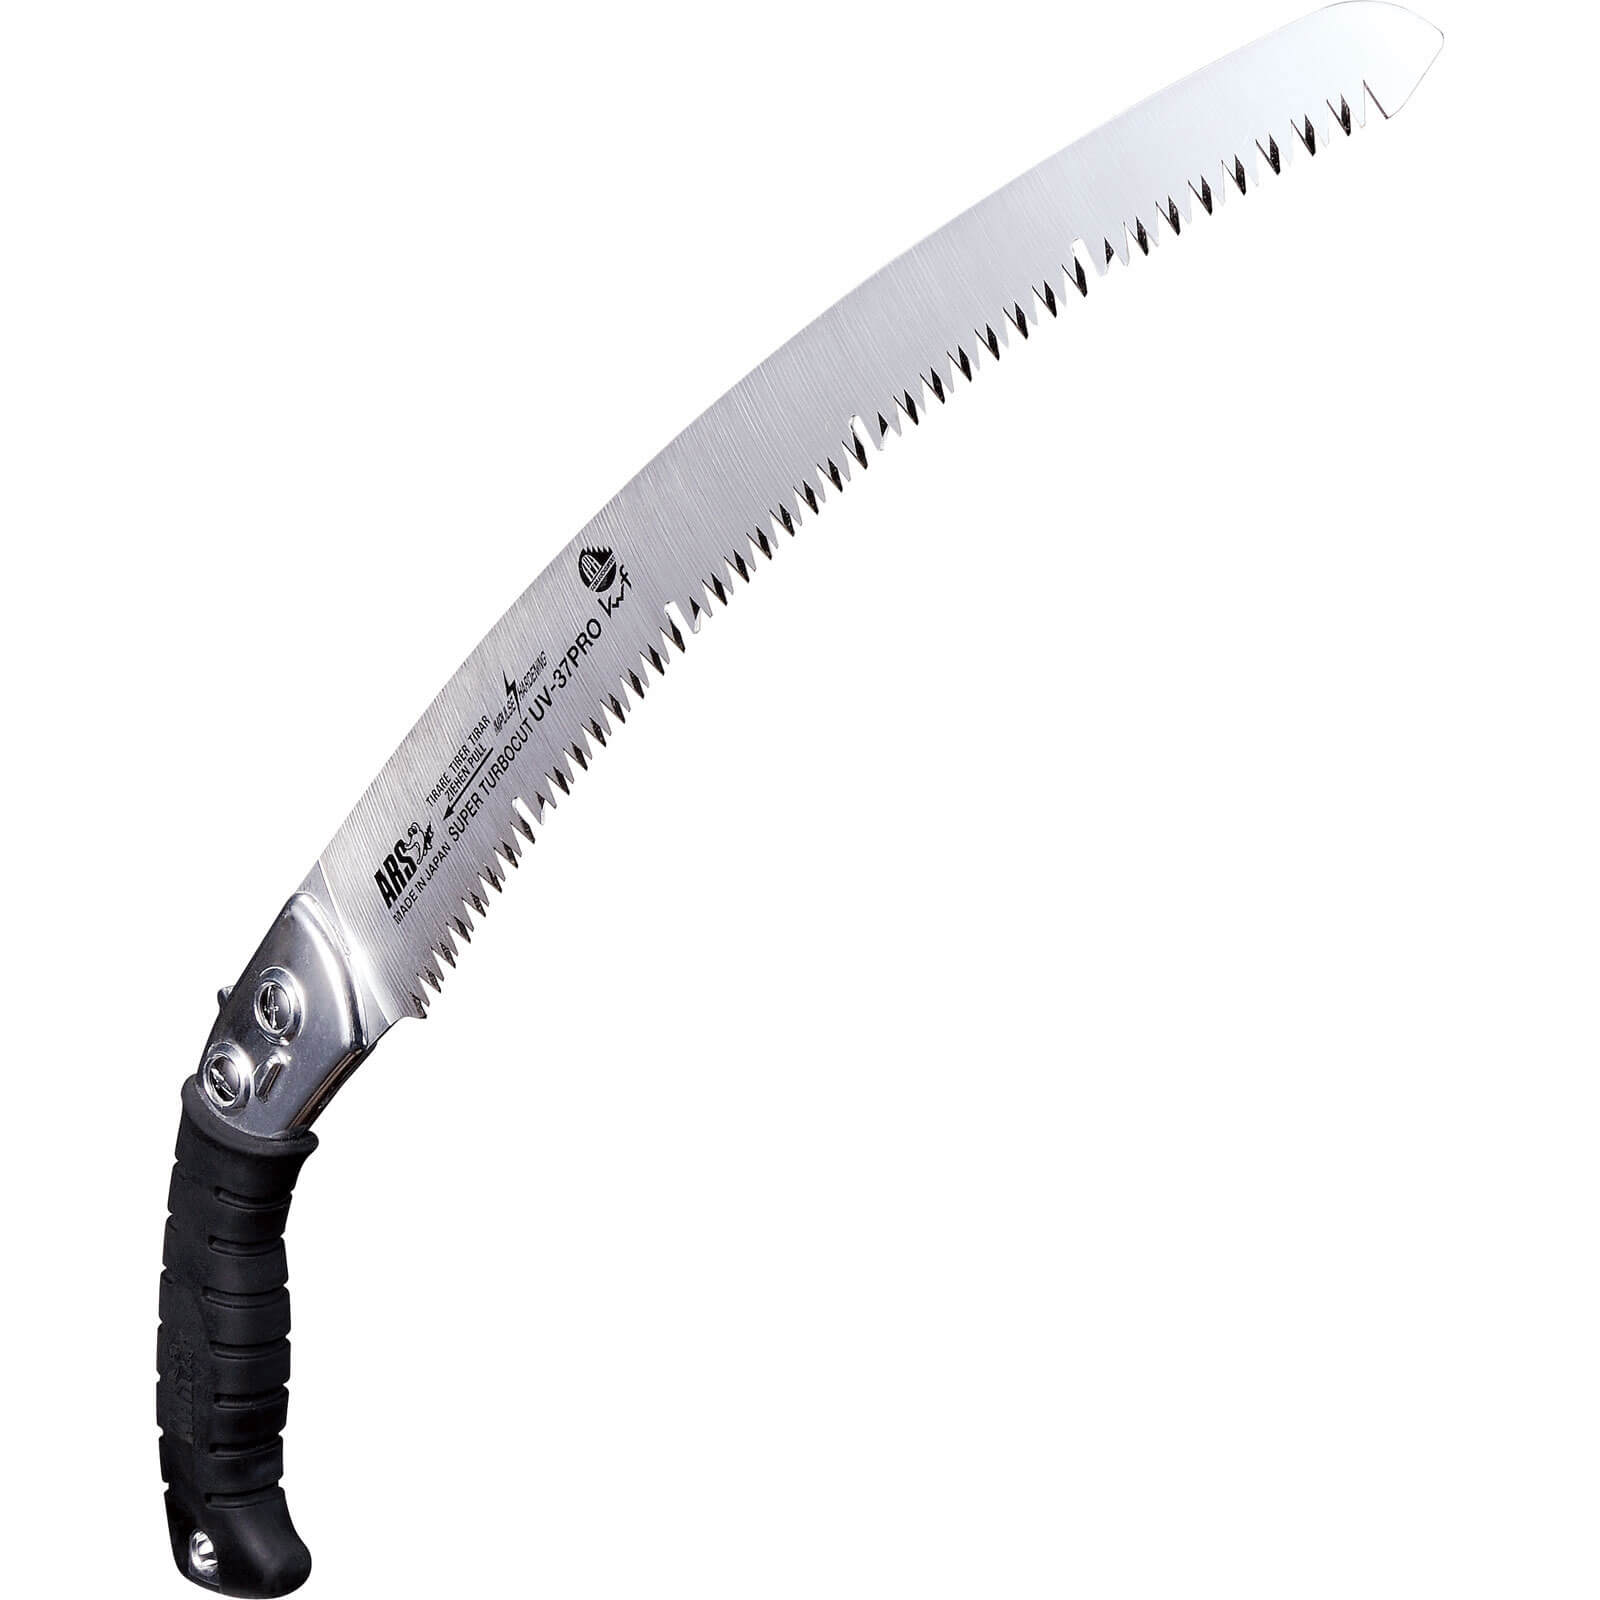 Image of ARS UV-37PRO Pruning Saw Super Turbocut Curved Blade 600mm